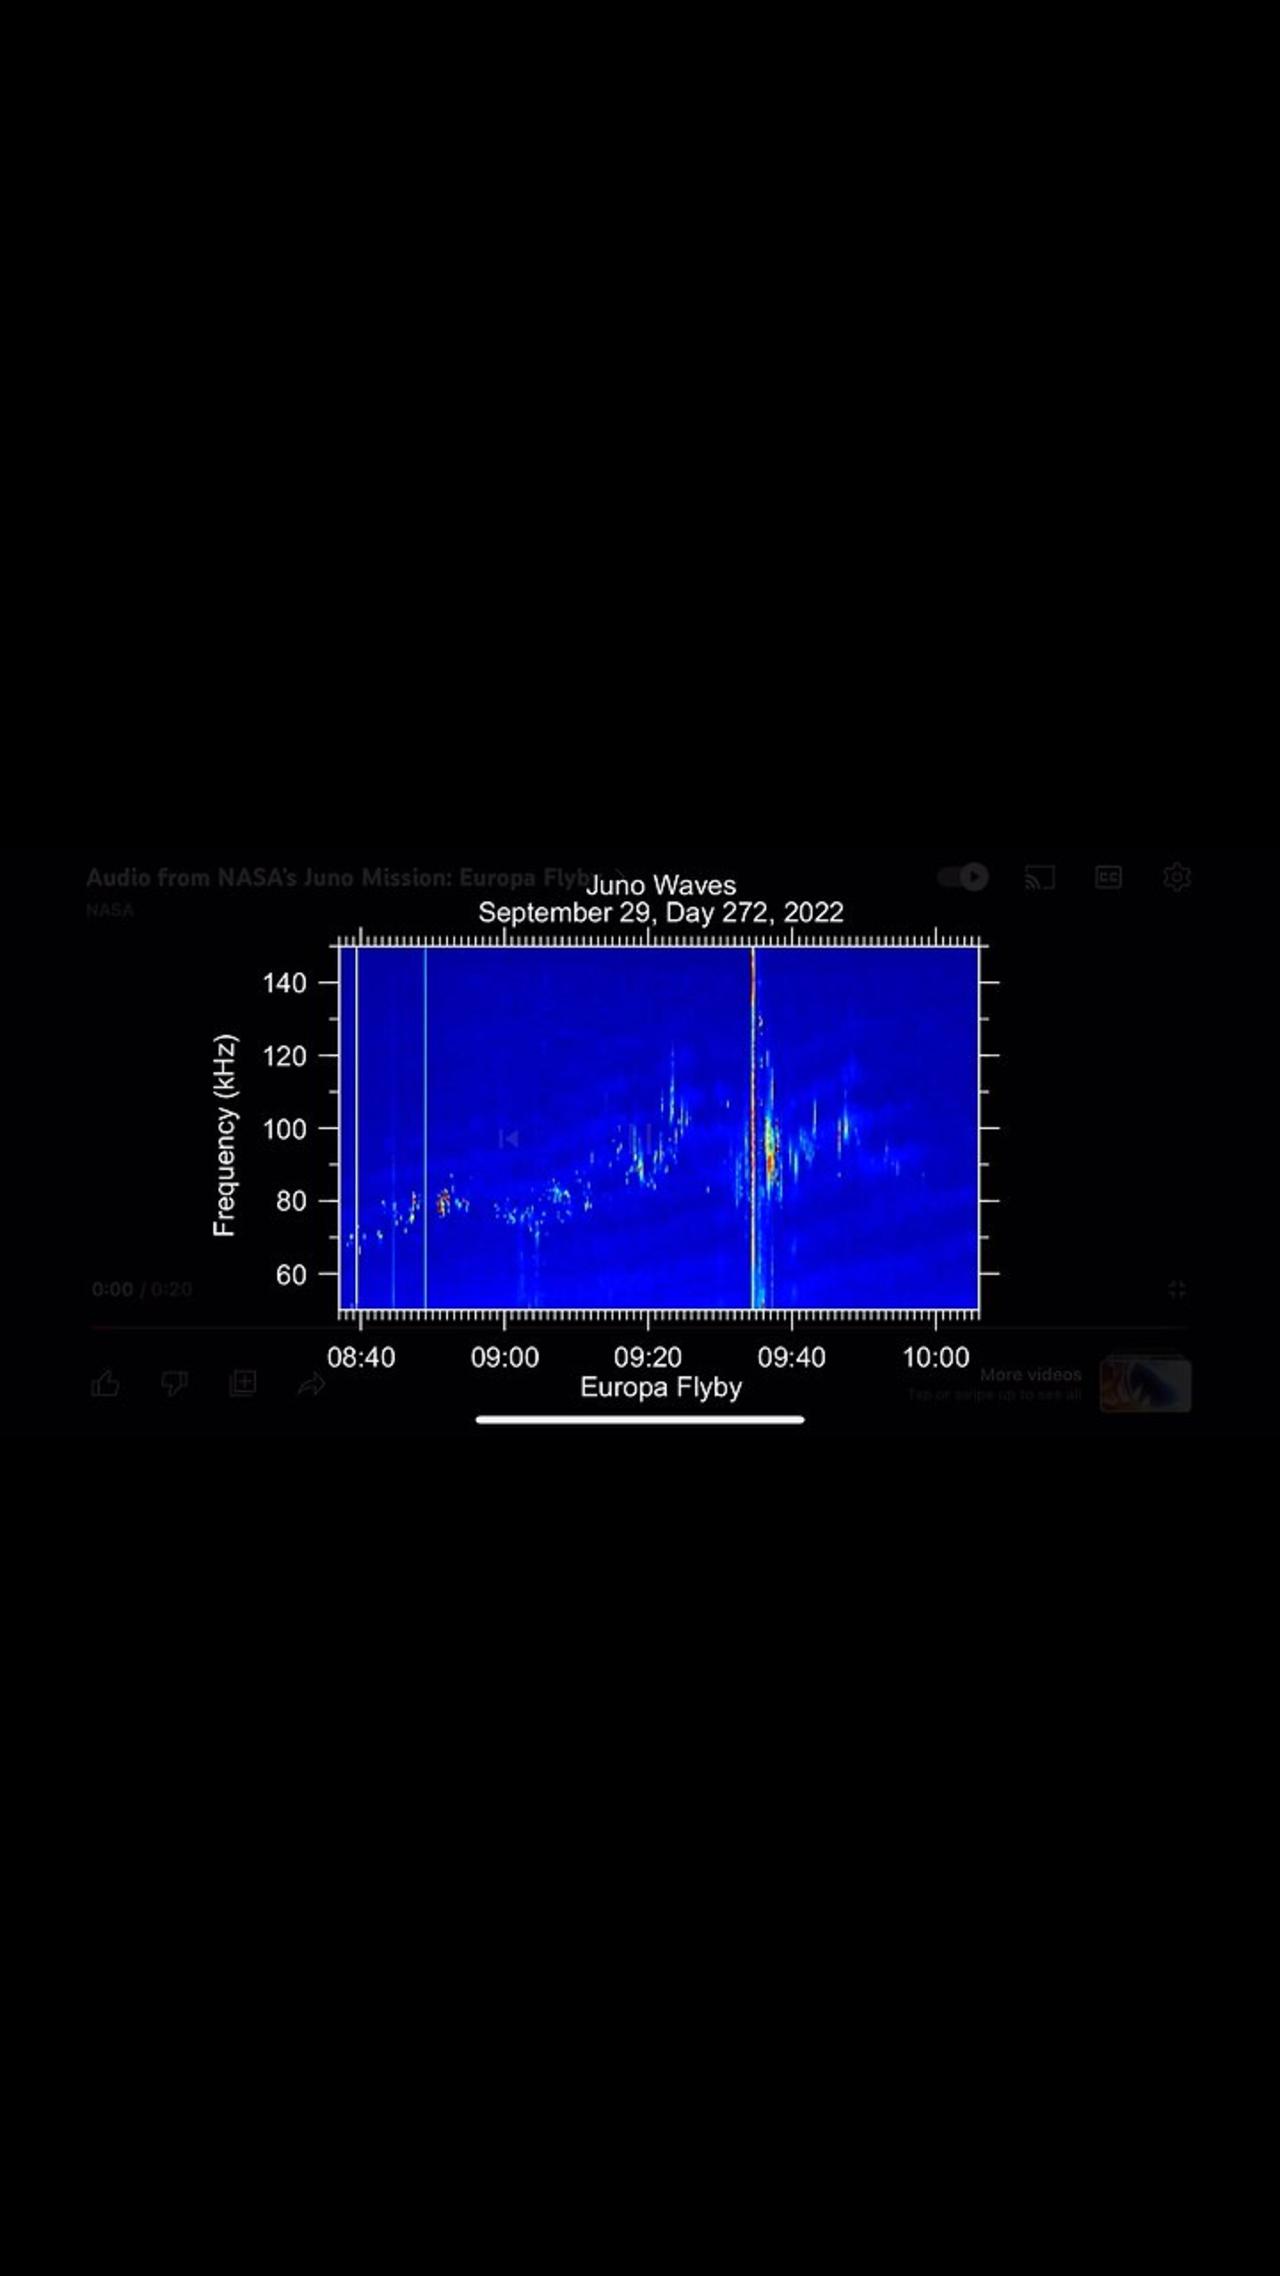 Audio From NASA’s Juno Mission